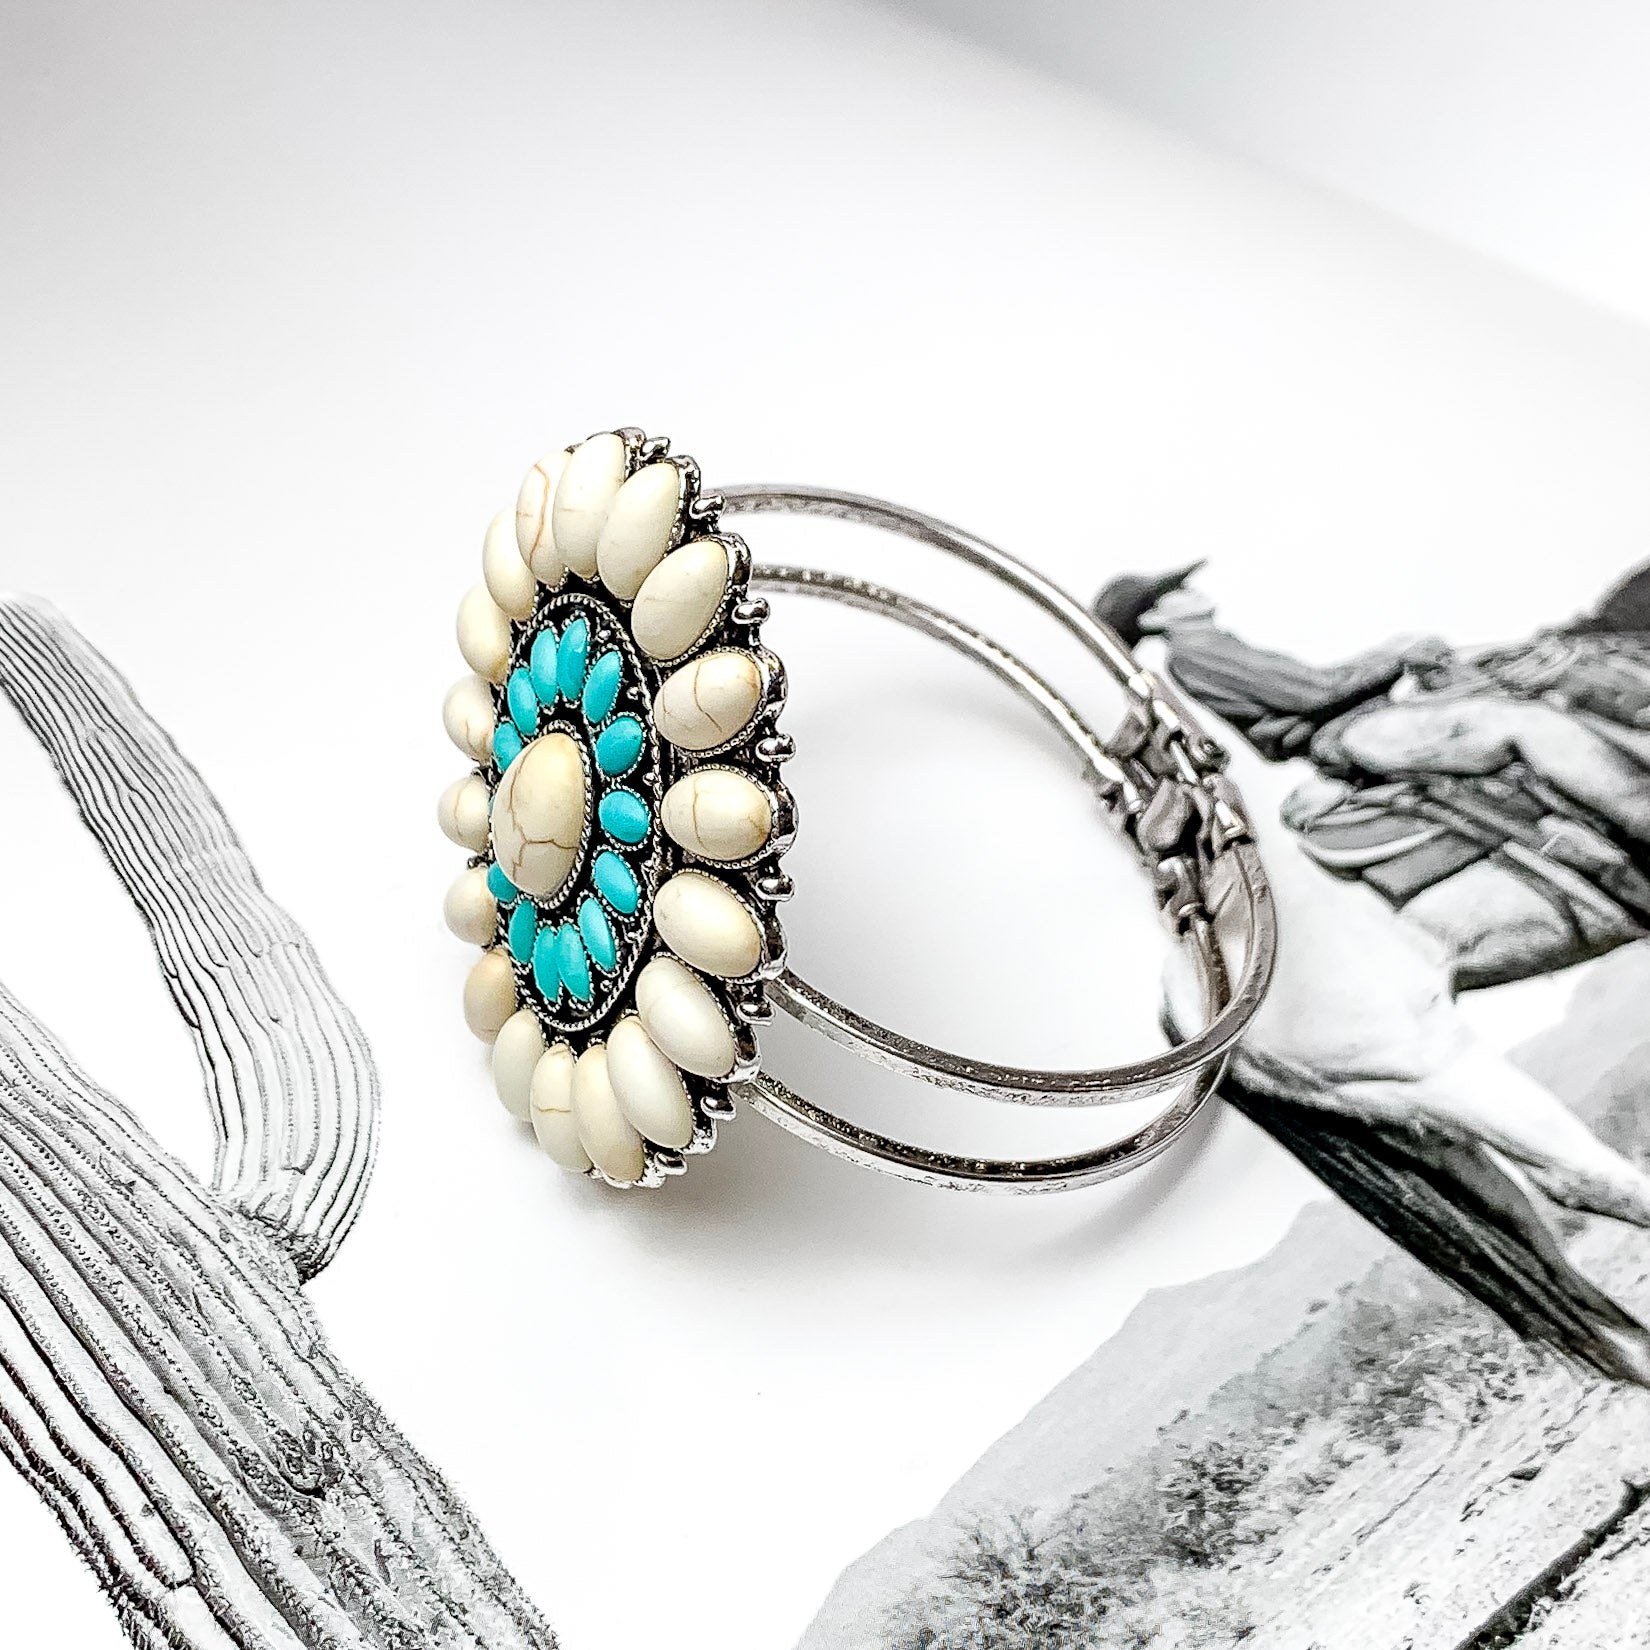 Ivory and Turquoise Oval Stone Concho Hinge Cuff Bracelet - Giddy Up Glamour Boutique